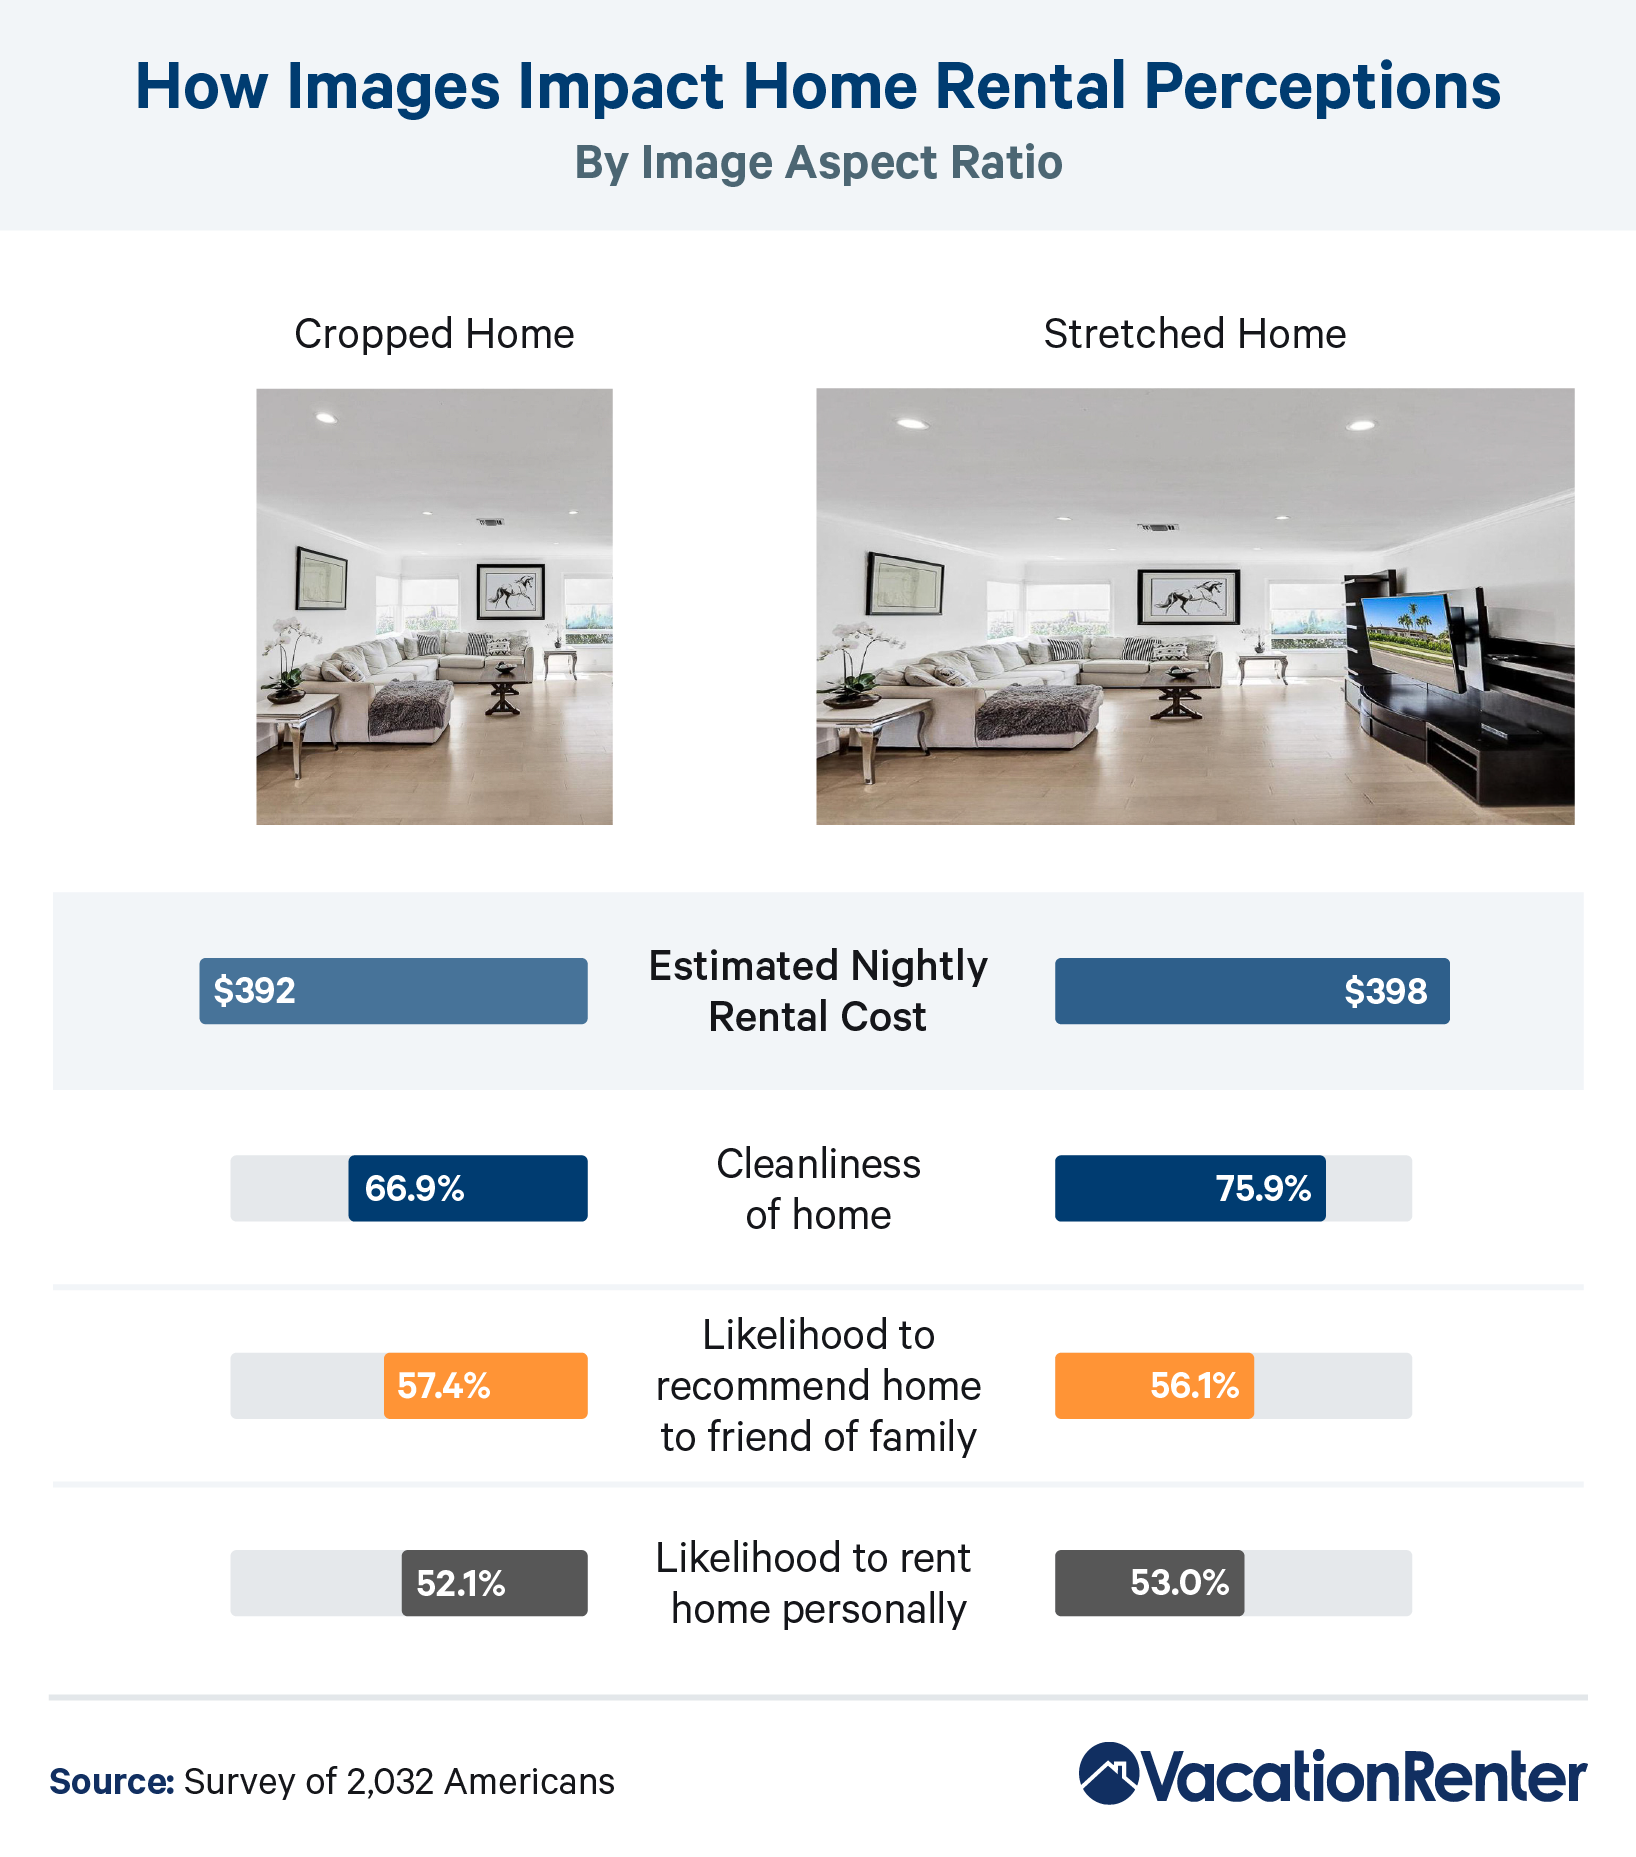 How image aspect ratio impacts home rental cost perceptions